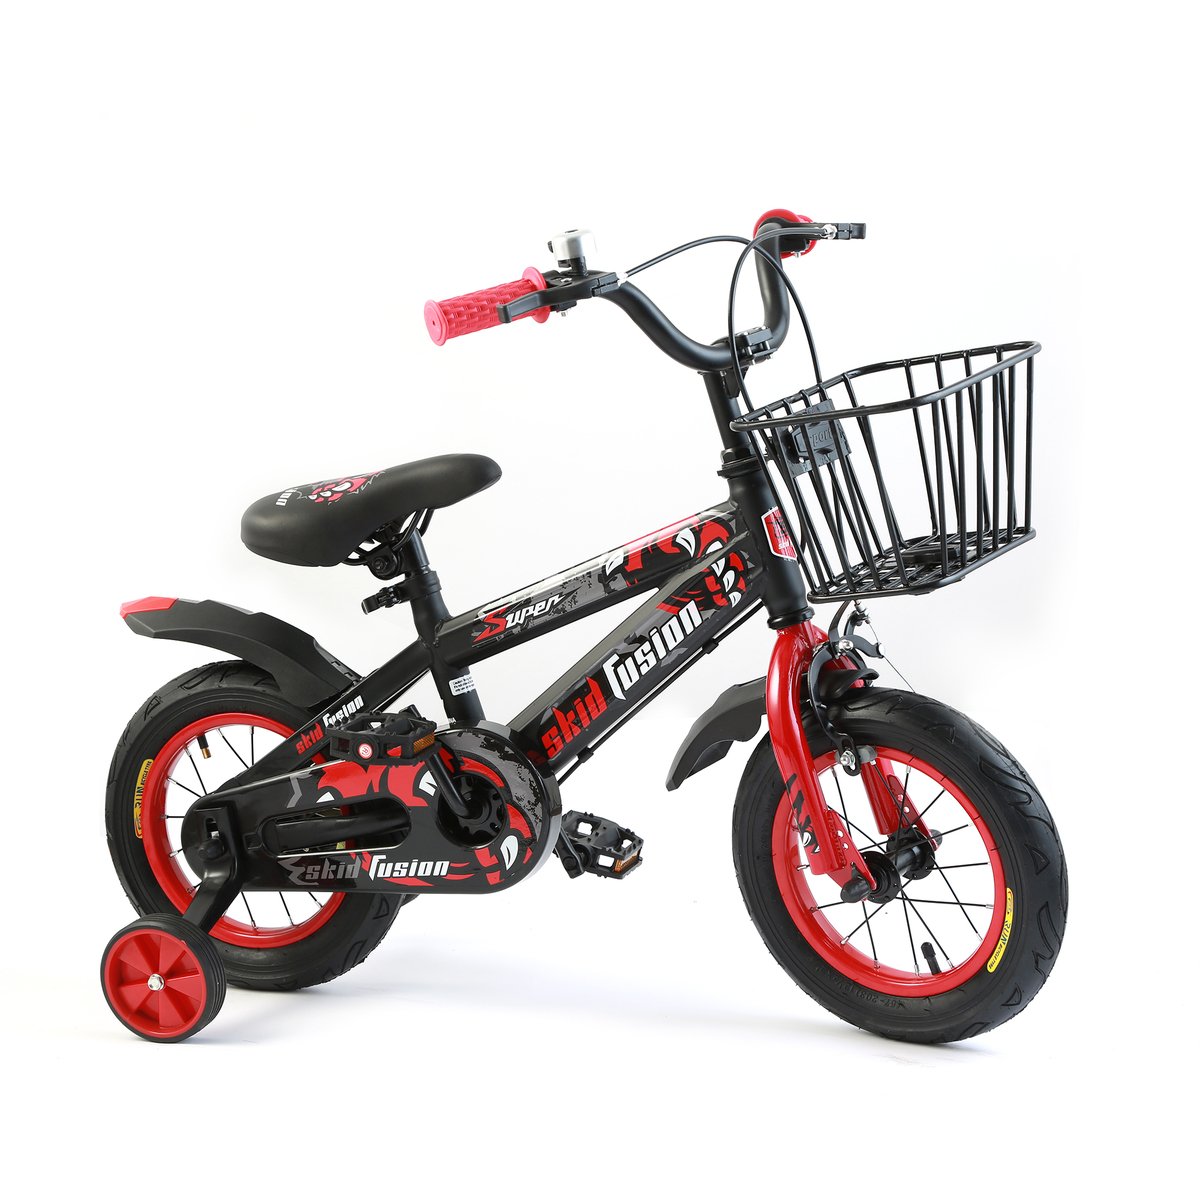 Skid Fusion Kids Bicycle 12 Inches Assorted Color YH-00312